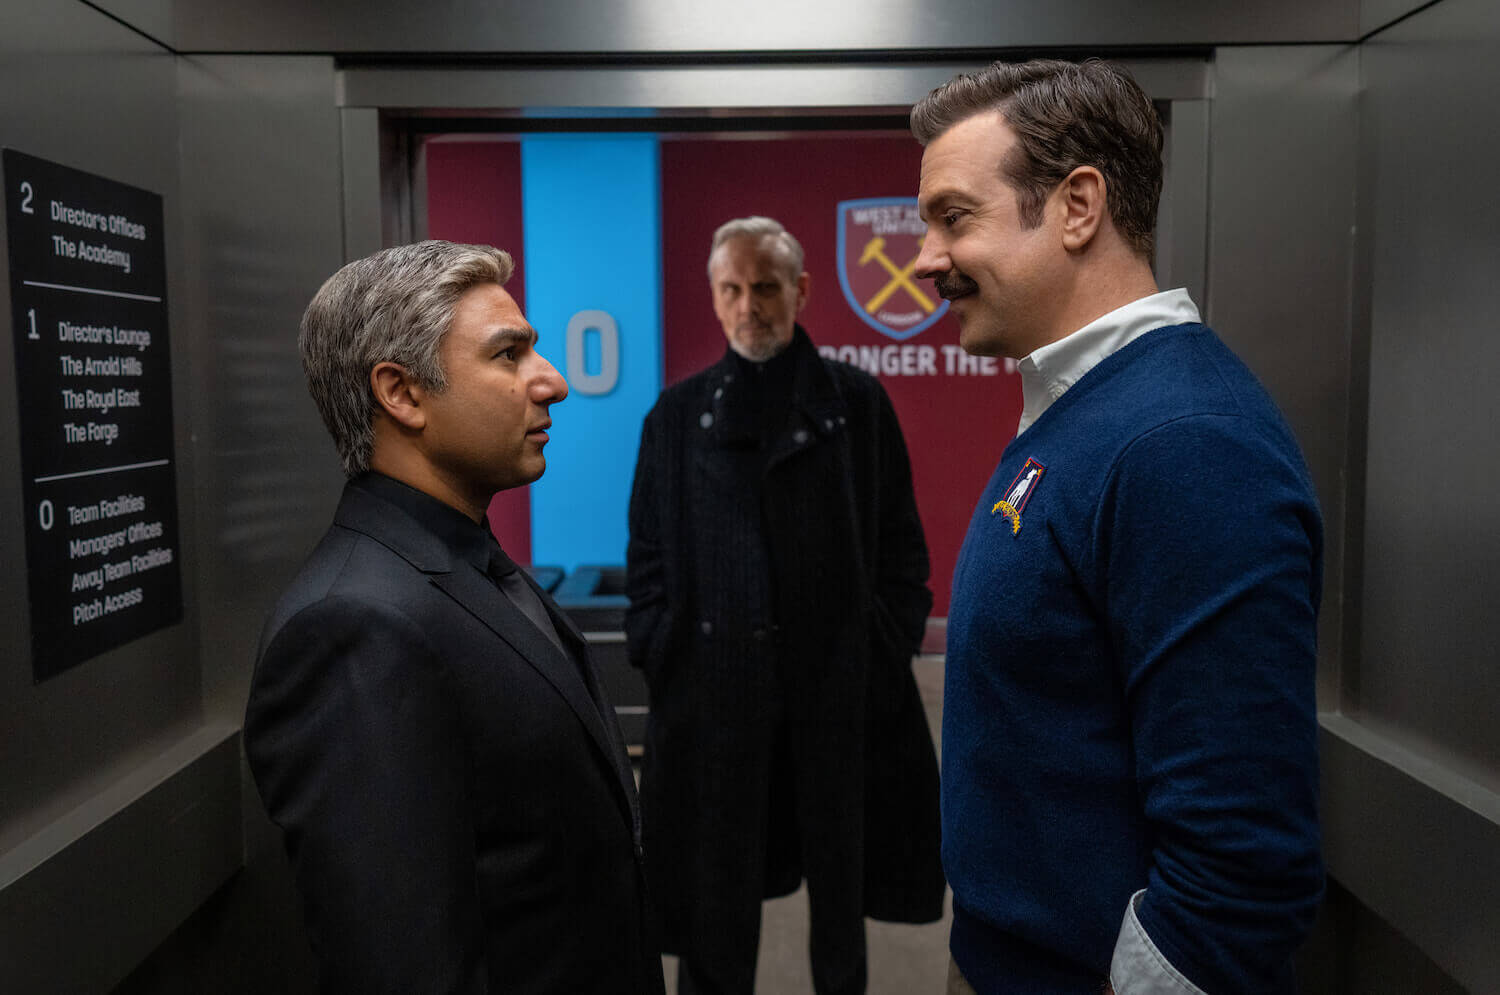 Nate and Ted are still at odds in the 'Ted Lasso' Season 3 trailer. Here we see Nate (Nick Mohammed) and Ted (Jason Sudeikis) looking at one another in a production still.